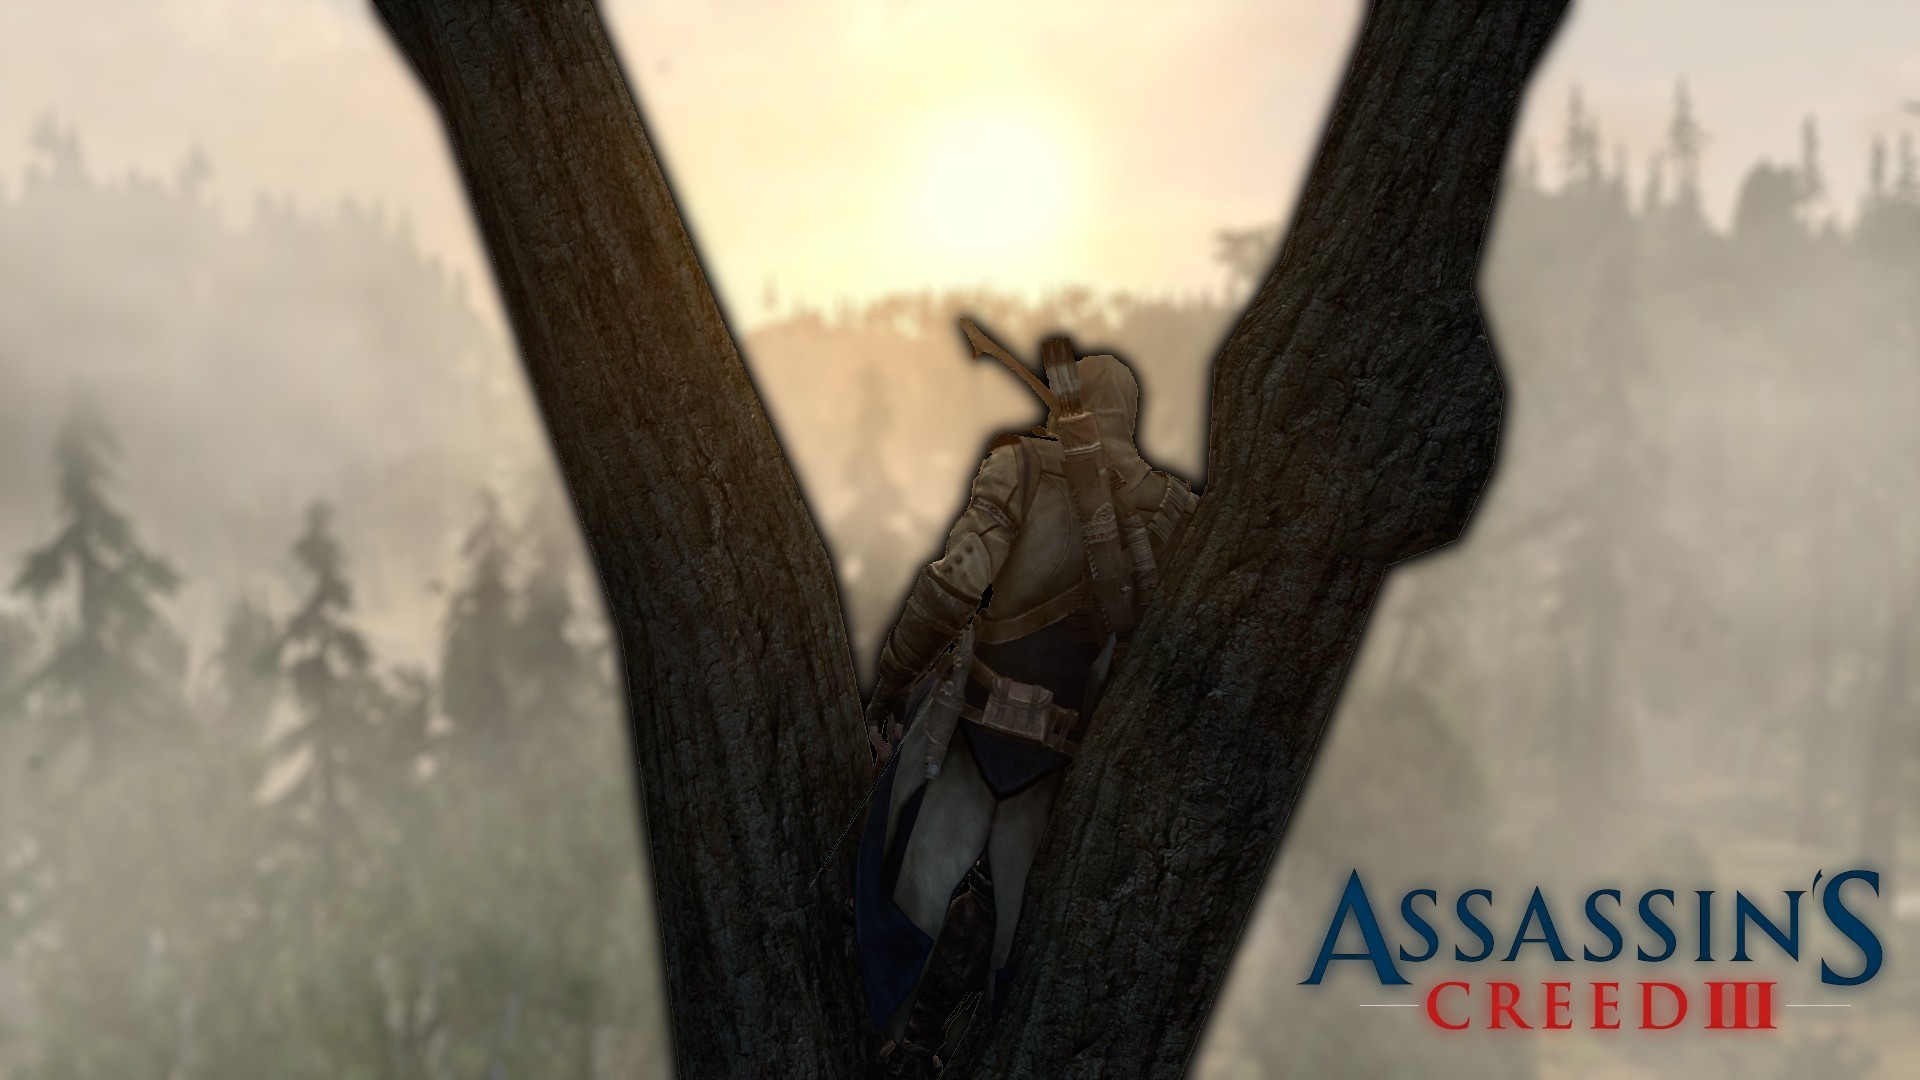 General 1920x1080 Assassin's Creed pine trees sun rays